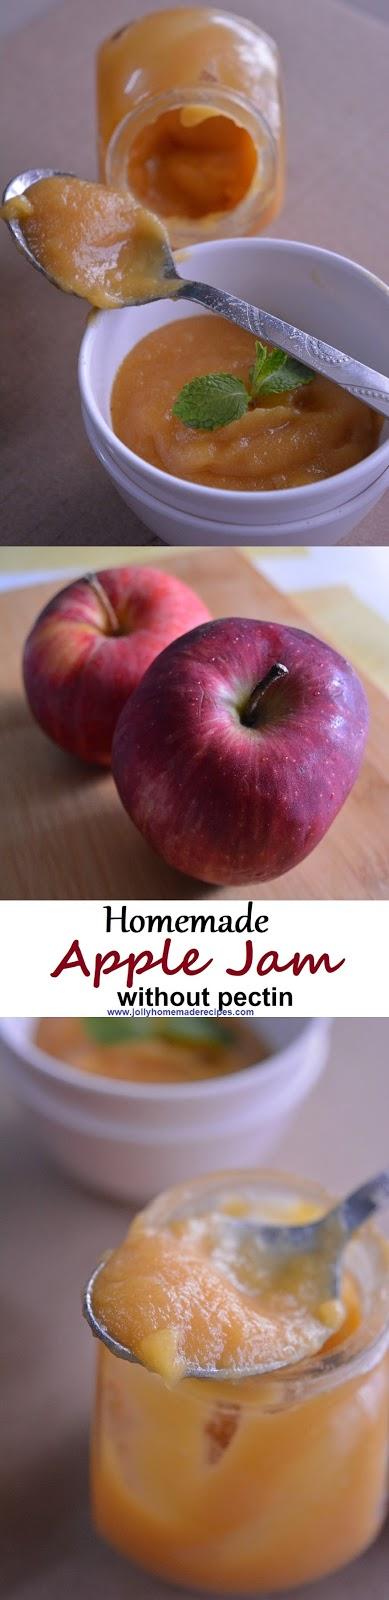 Homemade Apple Jam Recipe without Pectin, How to make Apple Jam Recipe for Babies/Toddlers | Apple Jam with Cinnamon